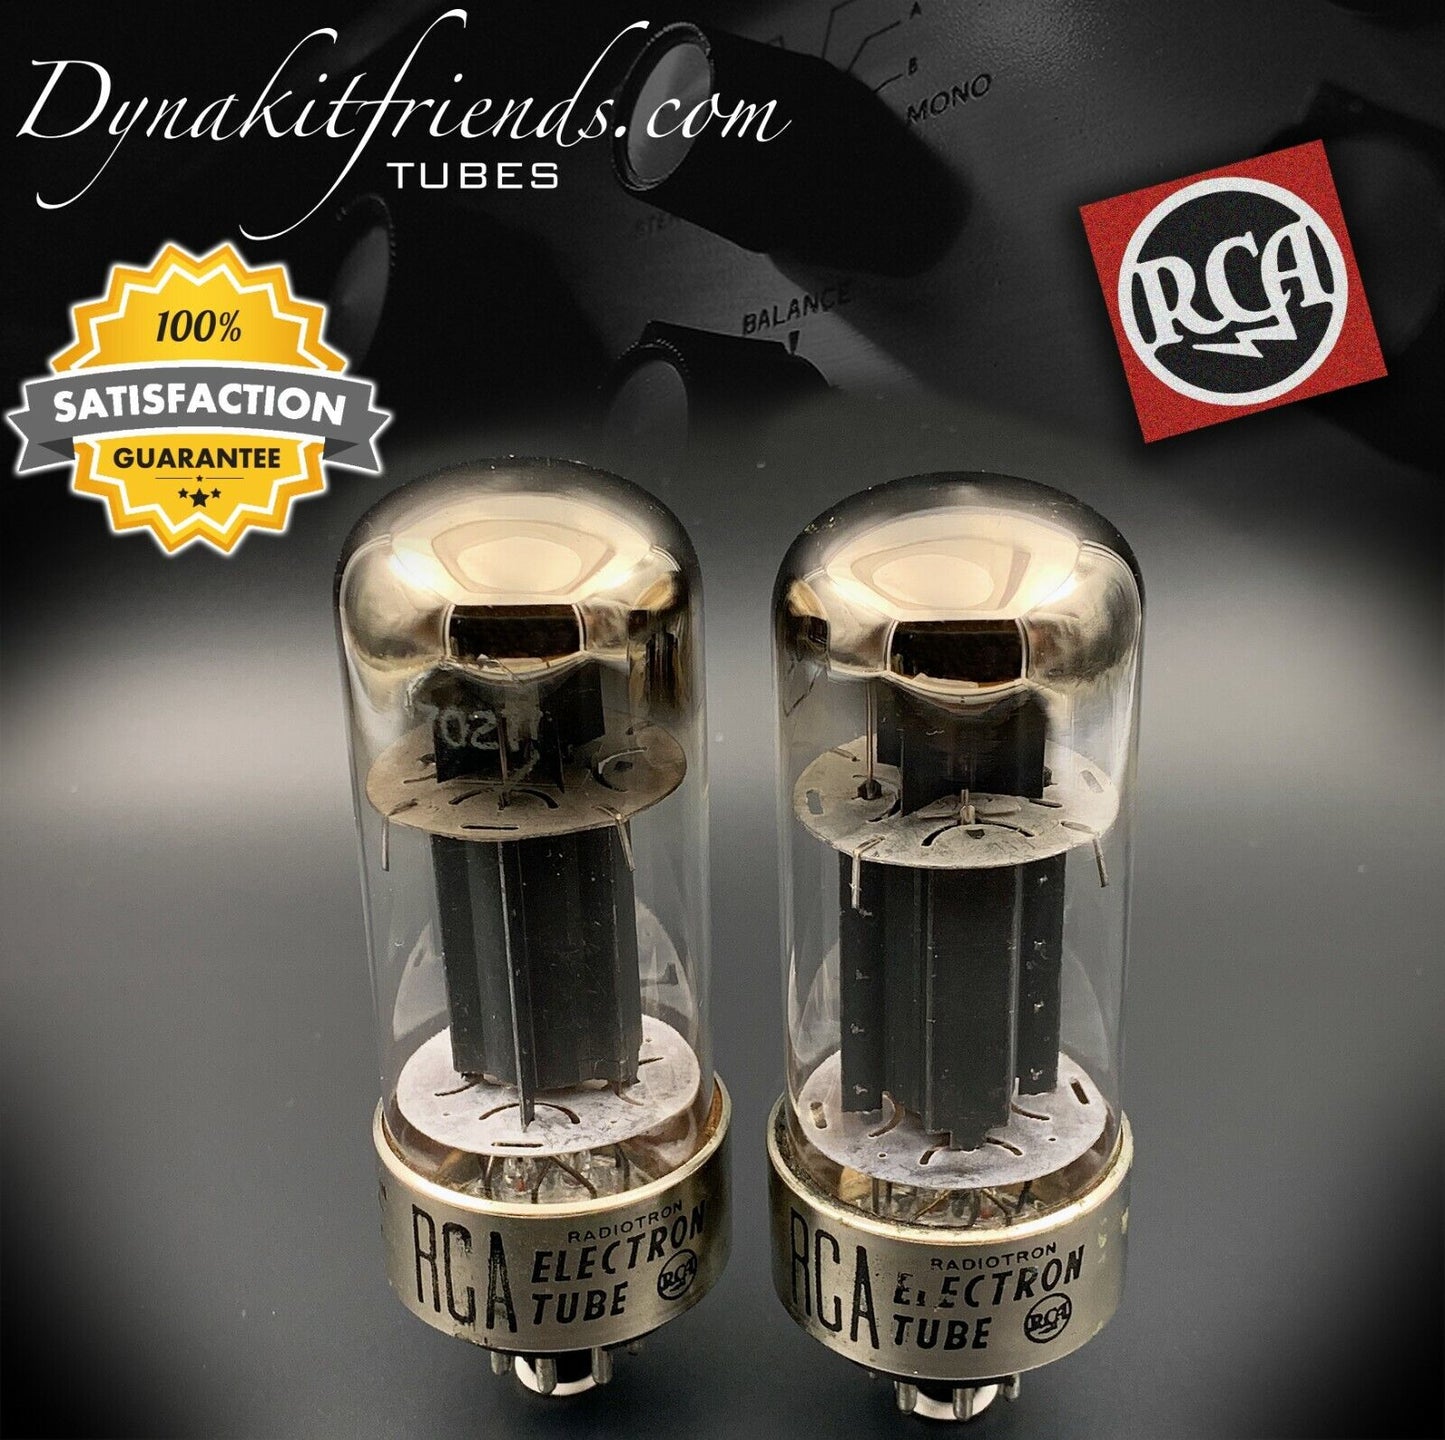 7027 RCA Black Plates Dual DD/[] Getter Metal Base Matched Tubes Made in USA